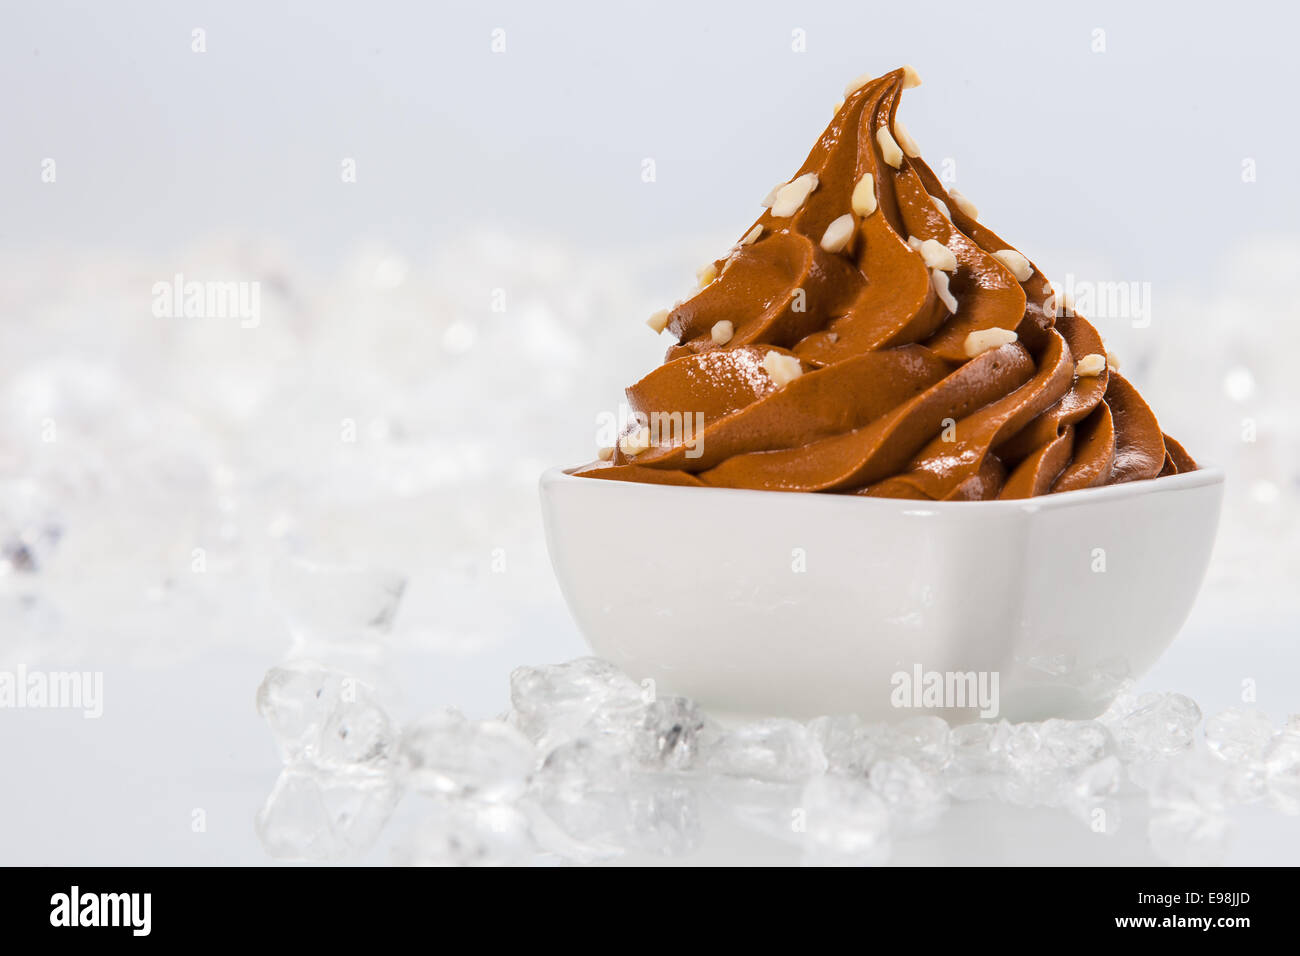 Tasty Brown Frozen Yogurt on White Bowl Surrounded by Ice on Table. Isolated on White Background. Stock Photo